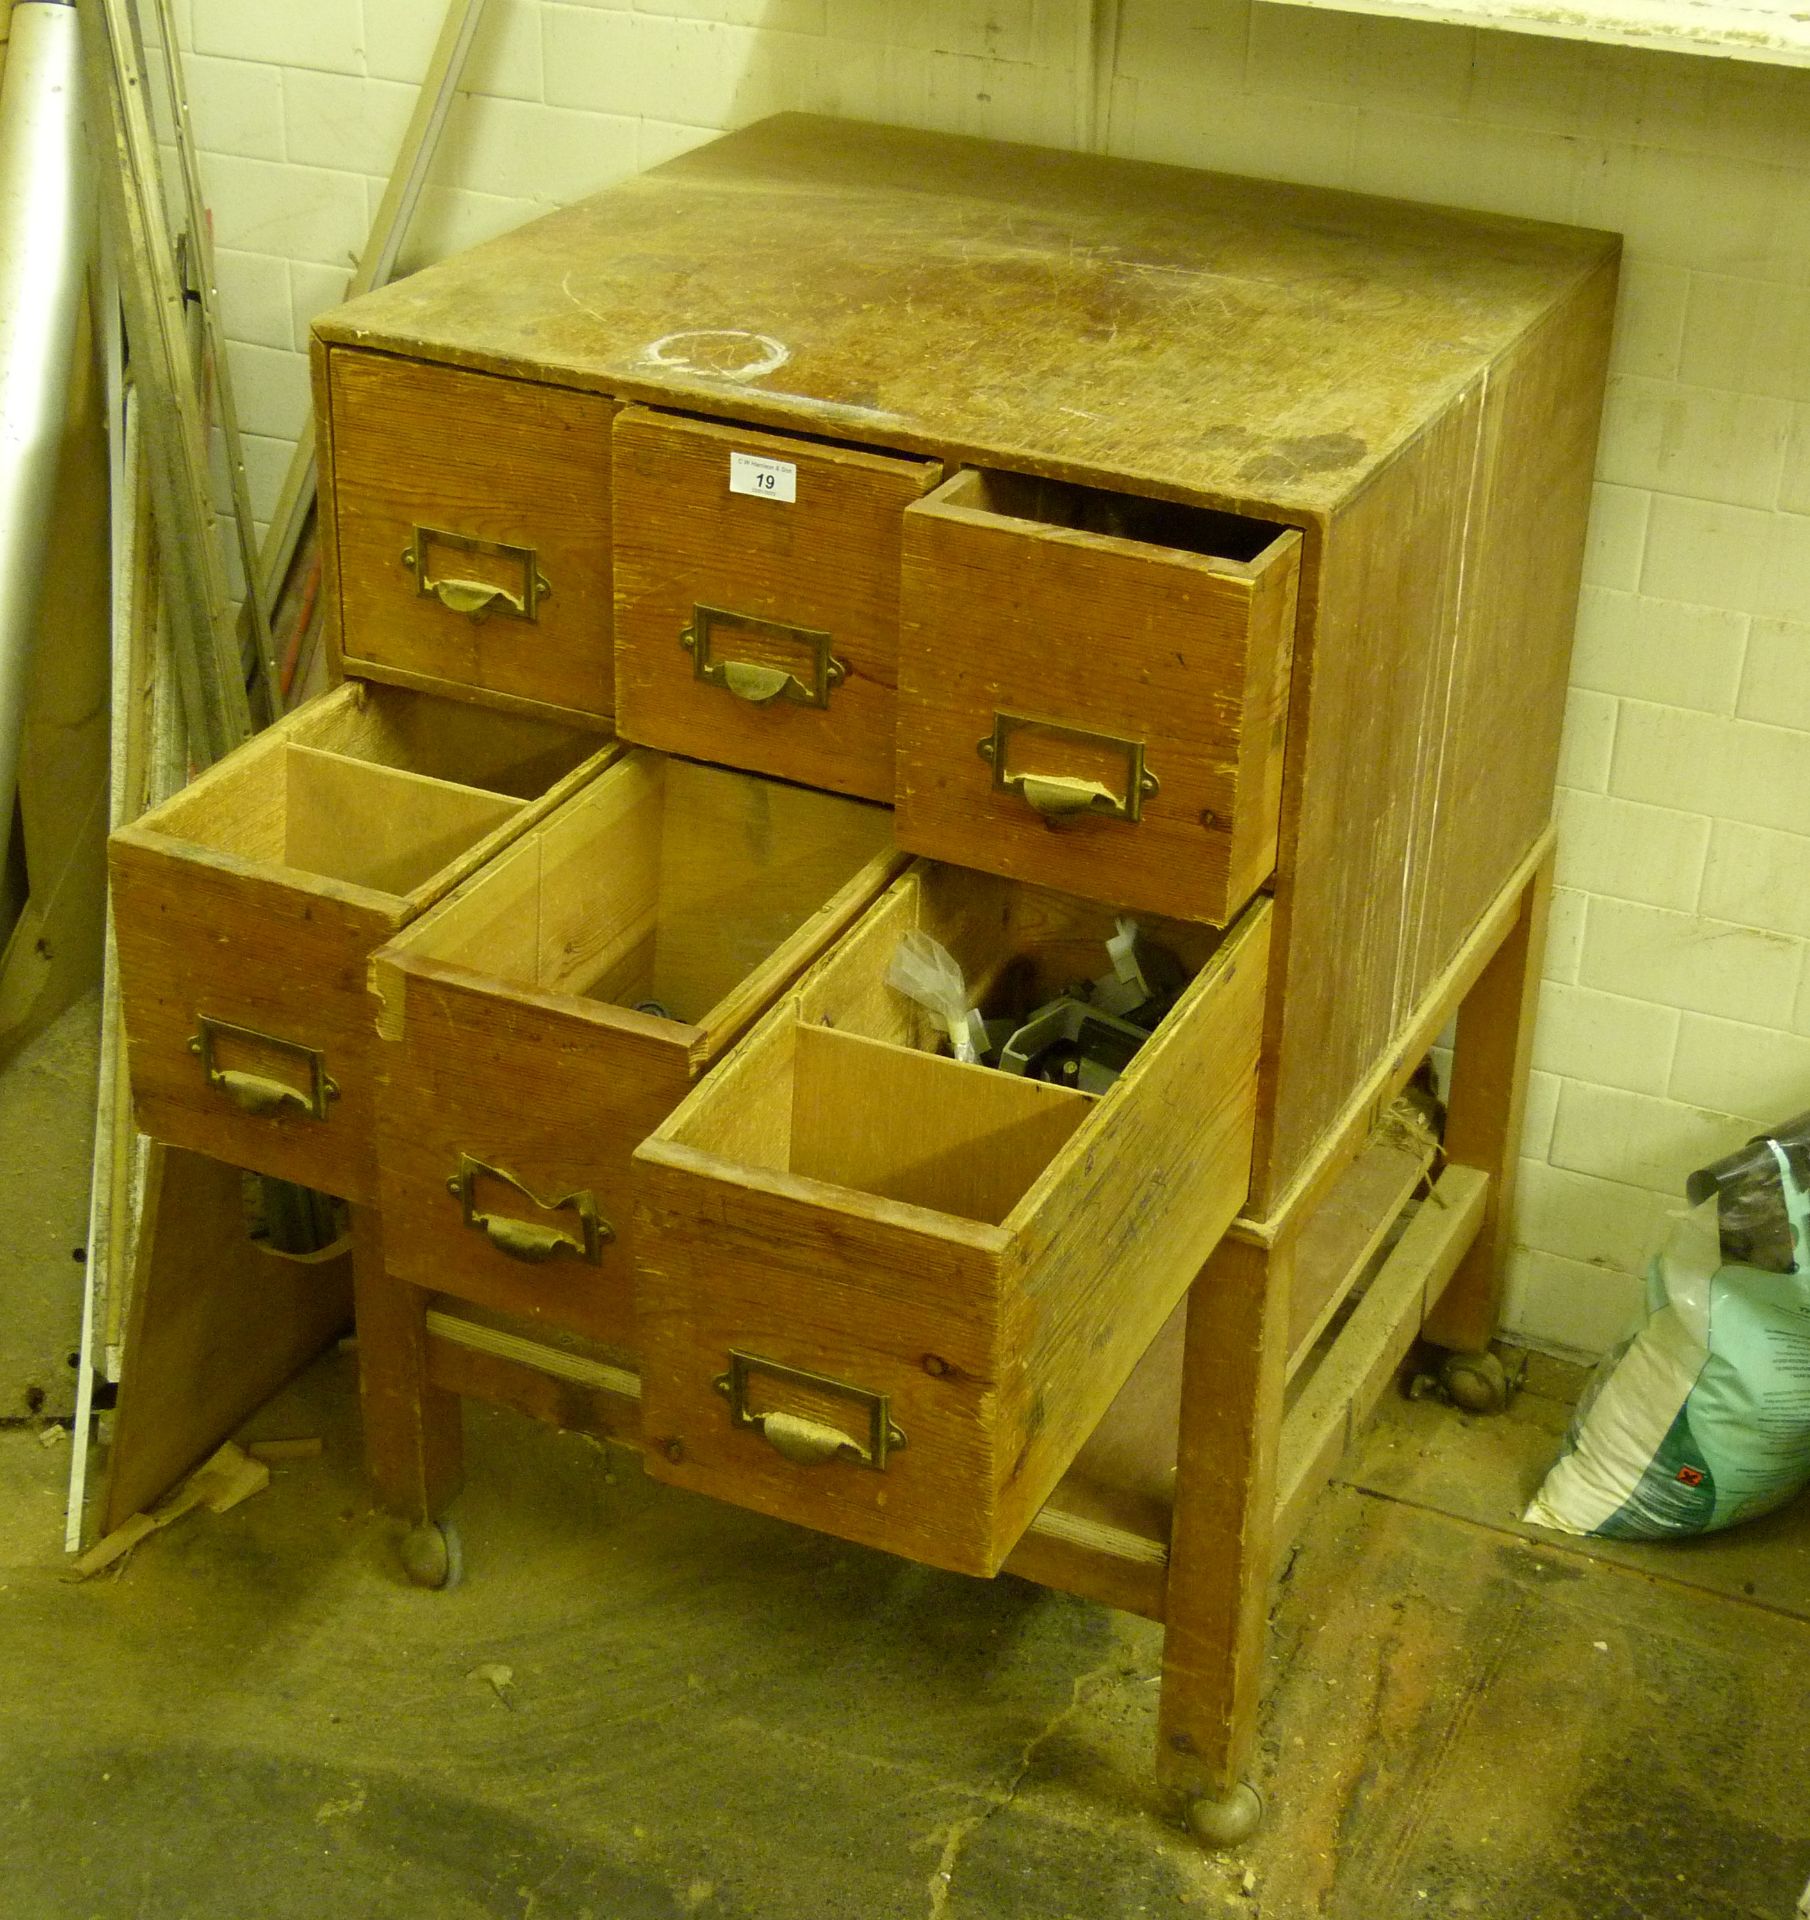 Six drawer unit to include contents - bolts, etc,